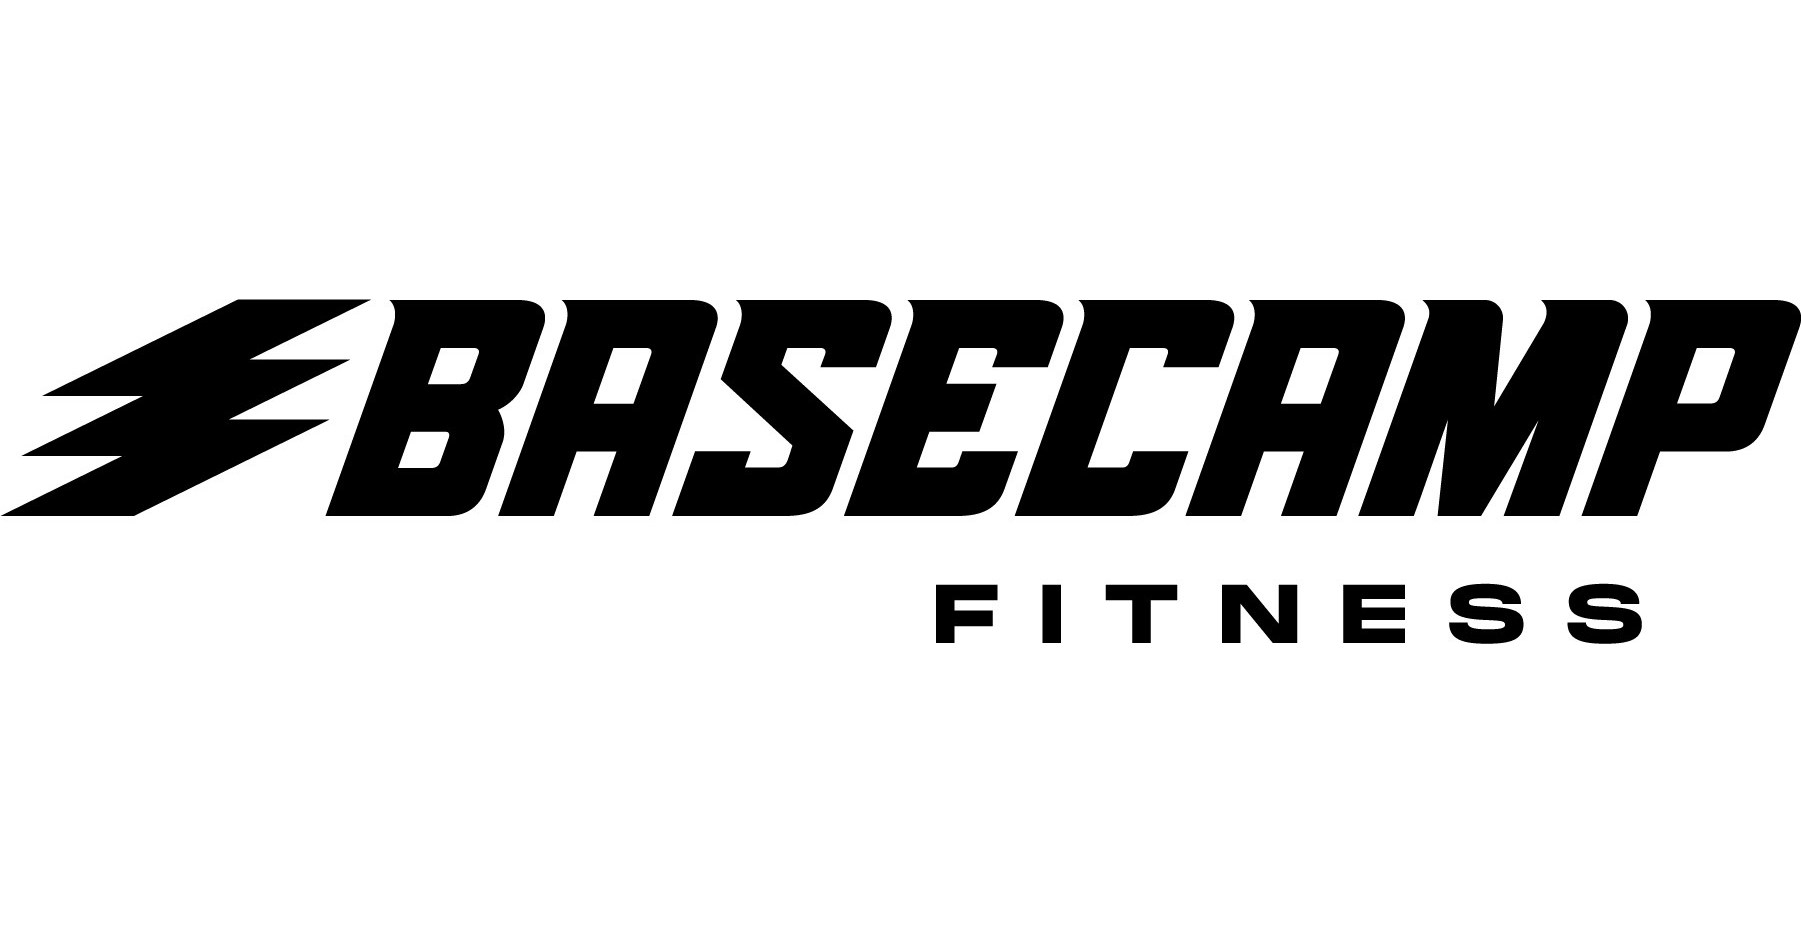 Basecamp Fitness is Bringing its Hyper-Condensed High-Intensity Workout to Oviedo with Membership Presale Beginning November 1